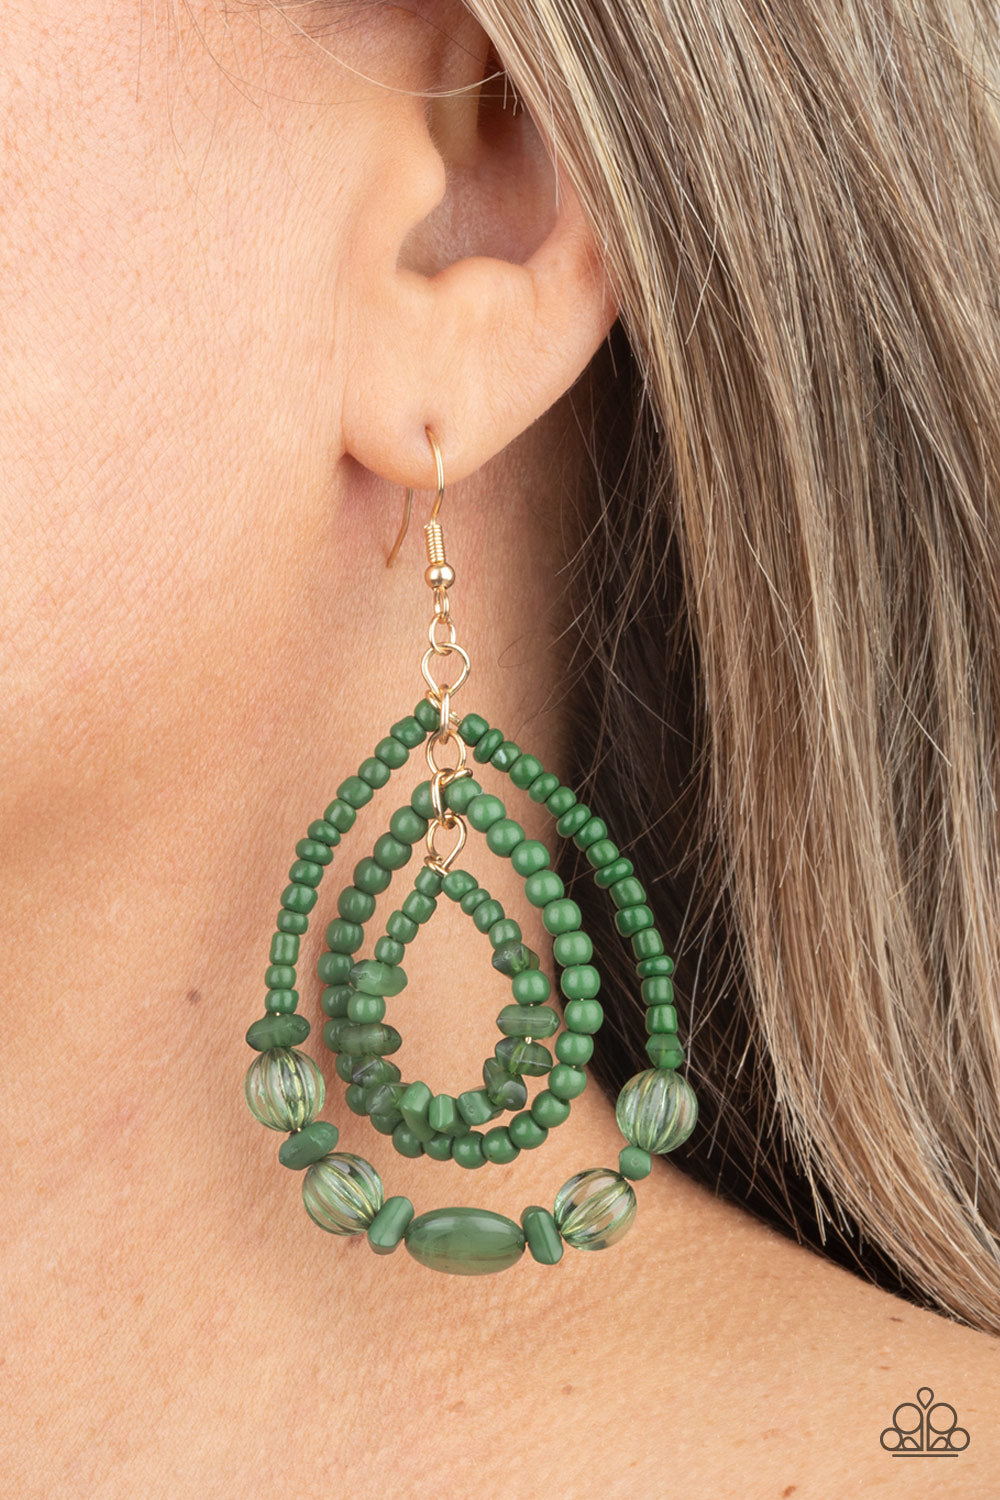 Prana Party Green Earring - Paparazzi Accessories  Varying in size and shape, mismatched green stone, seed bead, crystal-like, and faux stone beads are threaded along three dainty wires that connect into a colorful teardrop lure. Earring attaches to a standard fishhook fitting.  Sold as one pair of earrings.